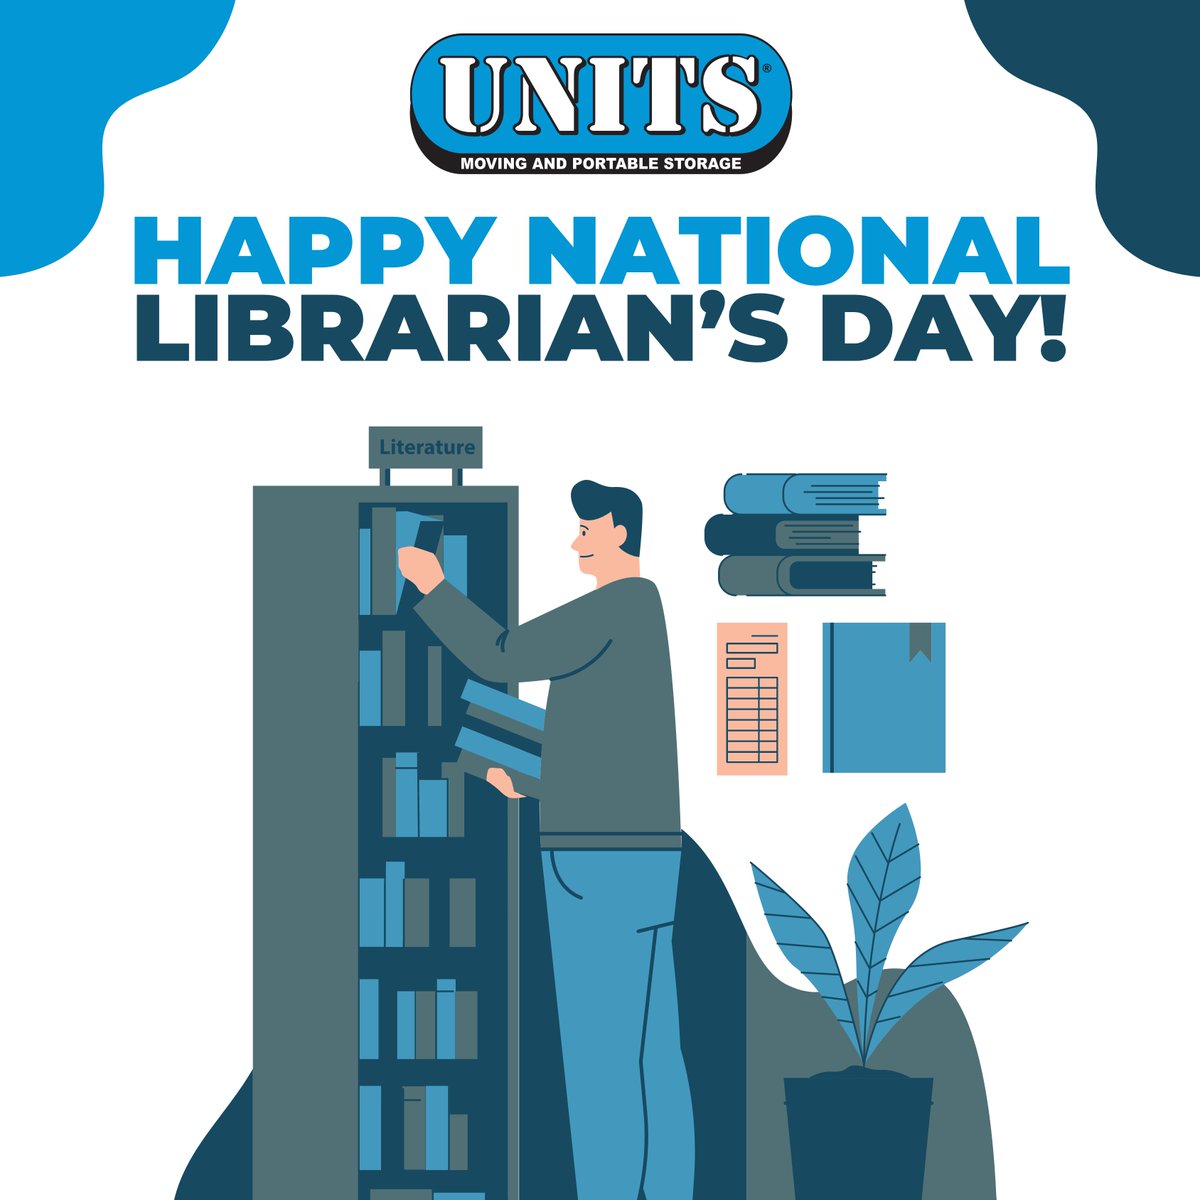 Happy National Librarian's Day! 📚 Today, we celebrate the unsung heroes who keep our communities informed and inspired. Thank you, librarians, for all that you do! #NationalLibrariansDay